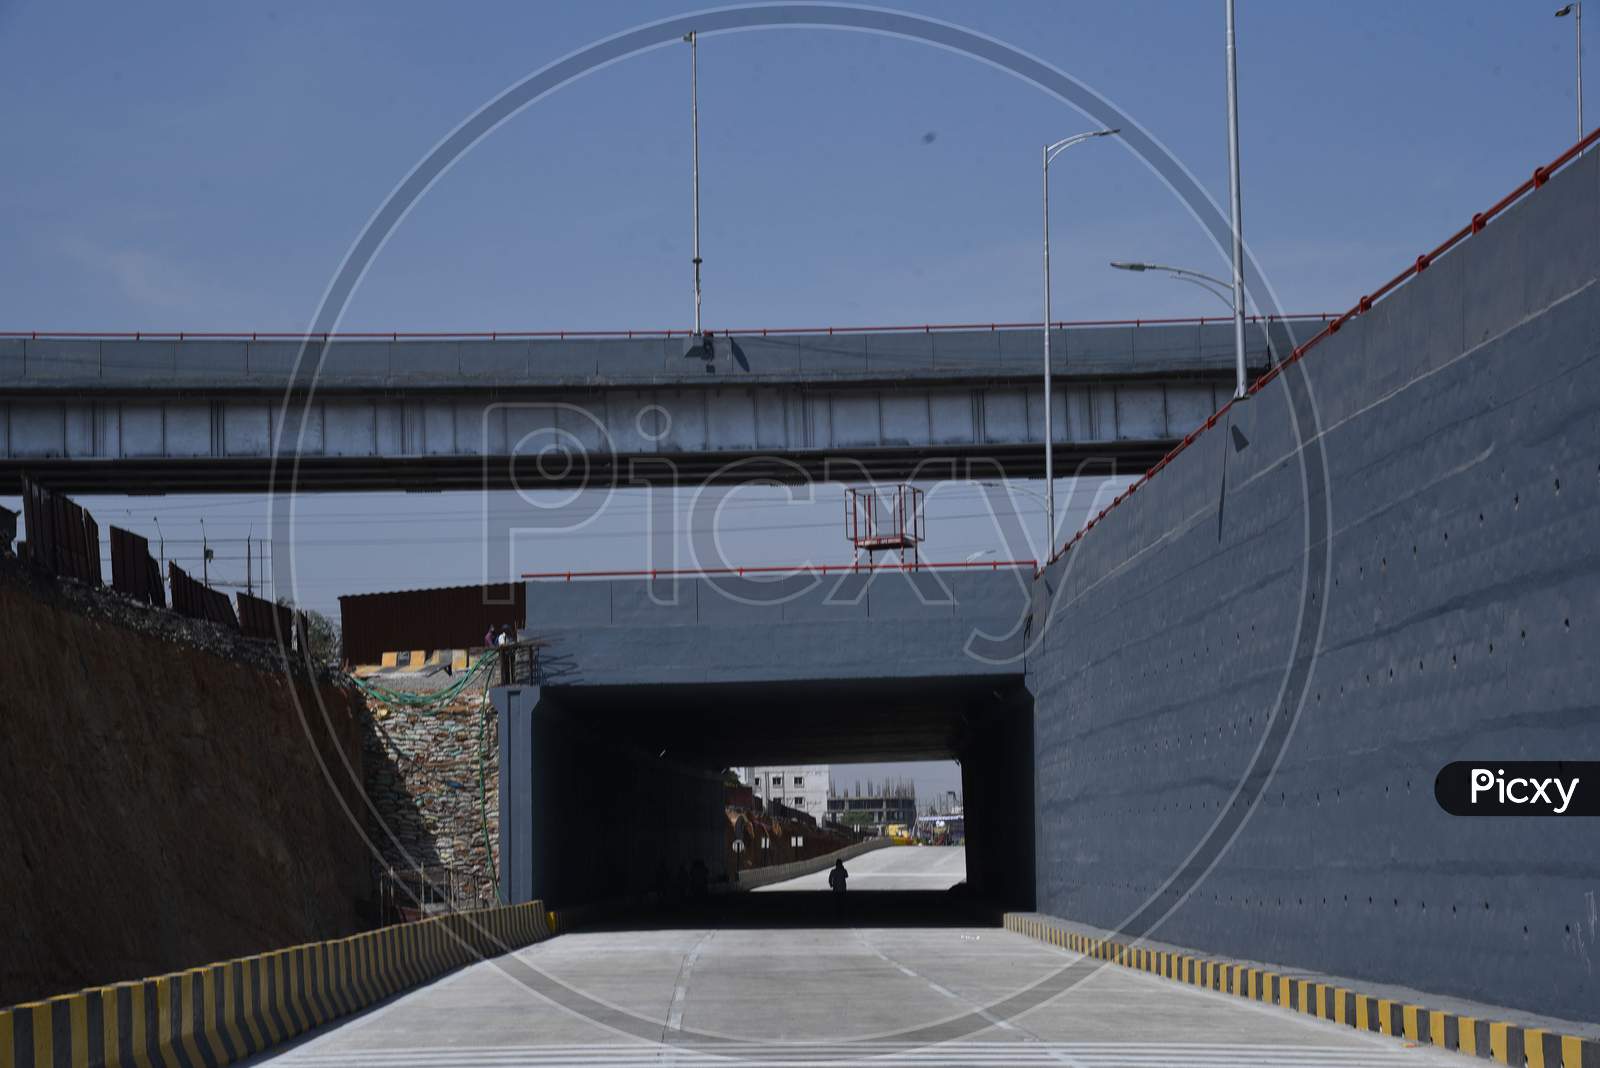 Vehicle Underpass At L.B Nagar As a Part Of Strategic Road Development Plan (SRDP) Been Inaugurated For Public Use Towards Biramalguda In Hyderabad City on May 28,2020